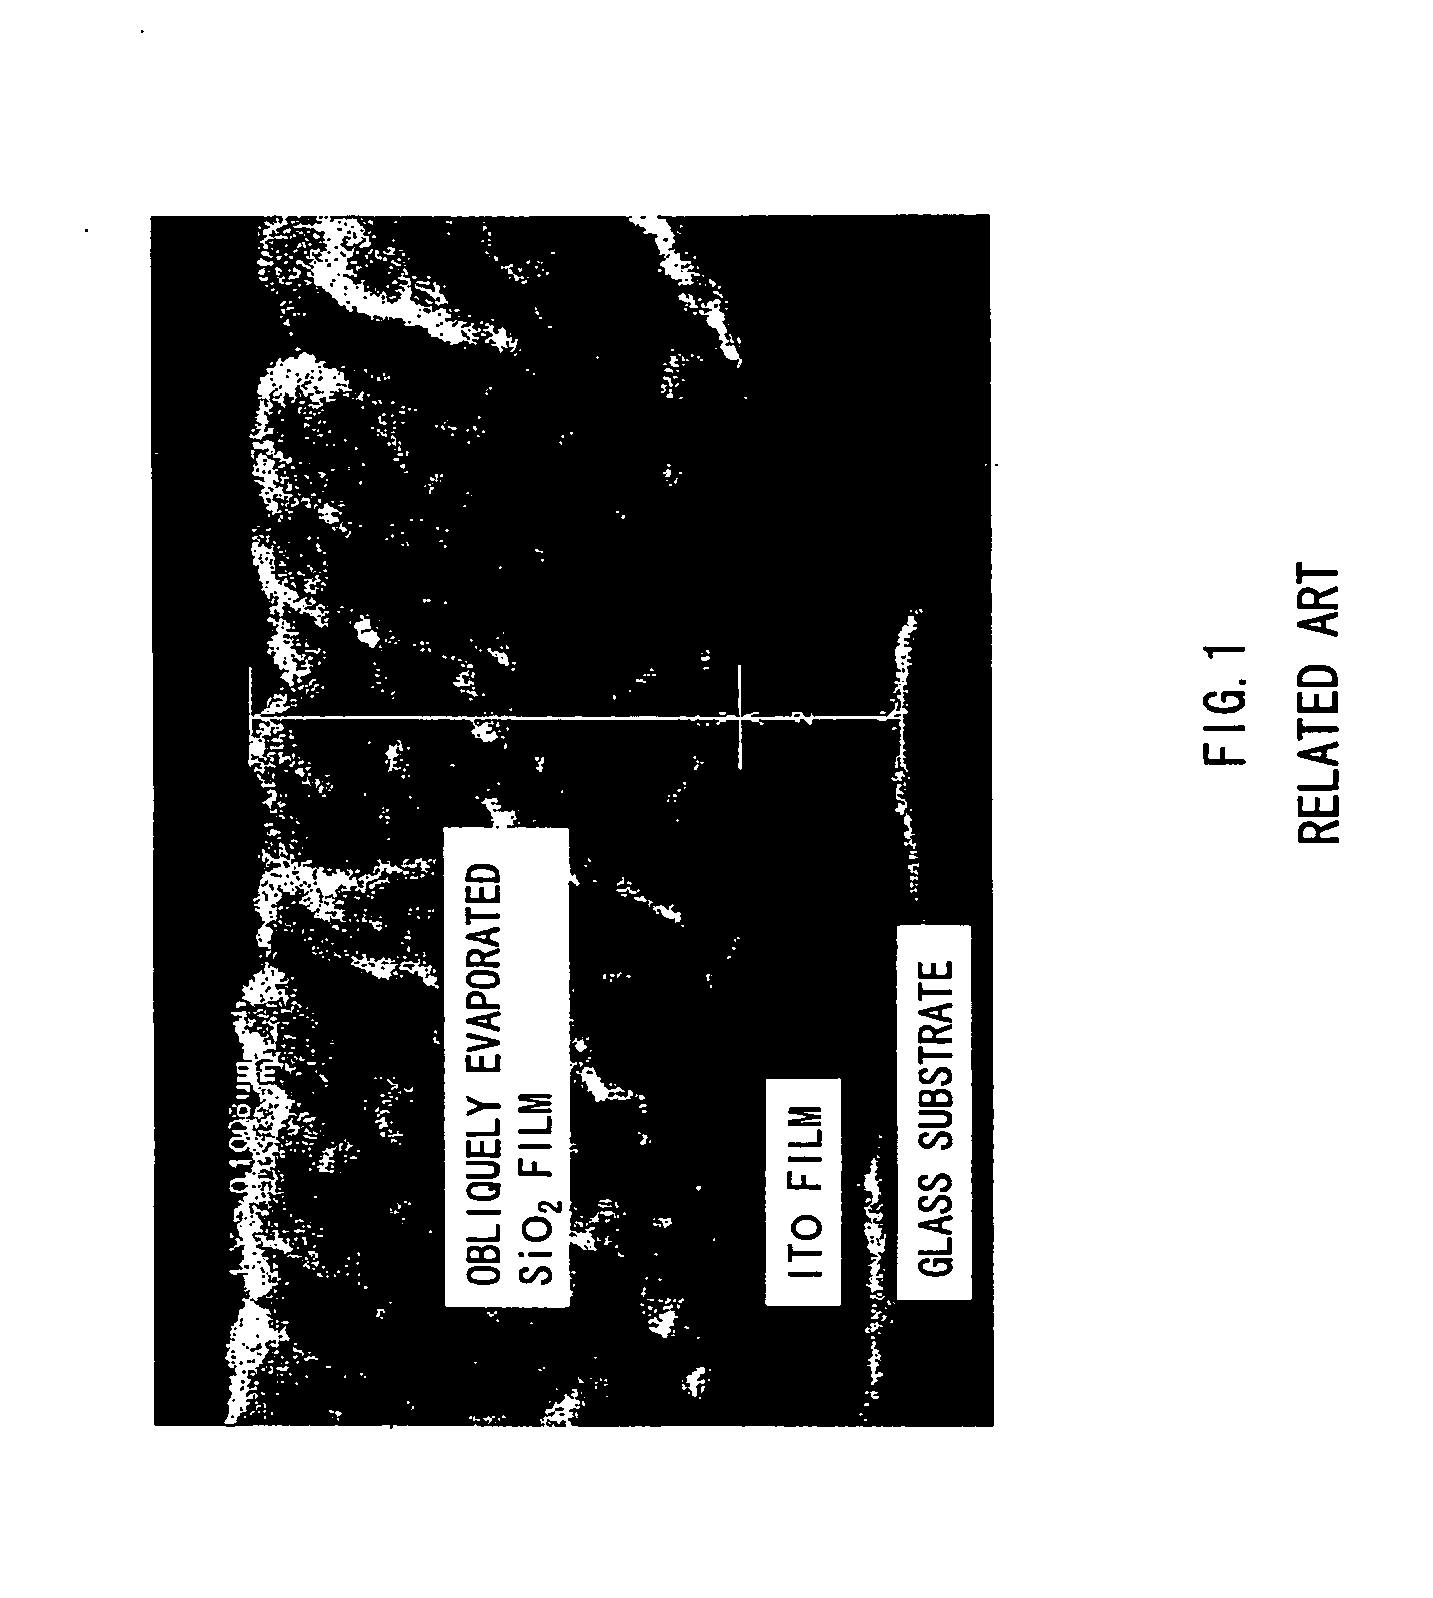 Reflective liquid crystal display device, method of manufacturing the same, and liquid crystal display unit